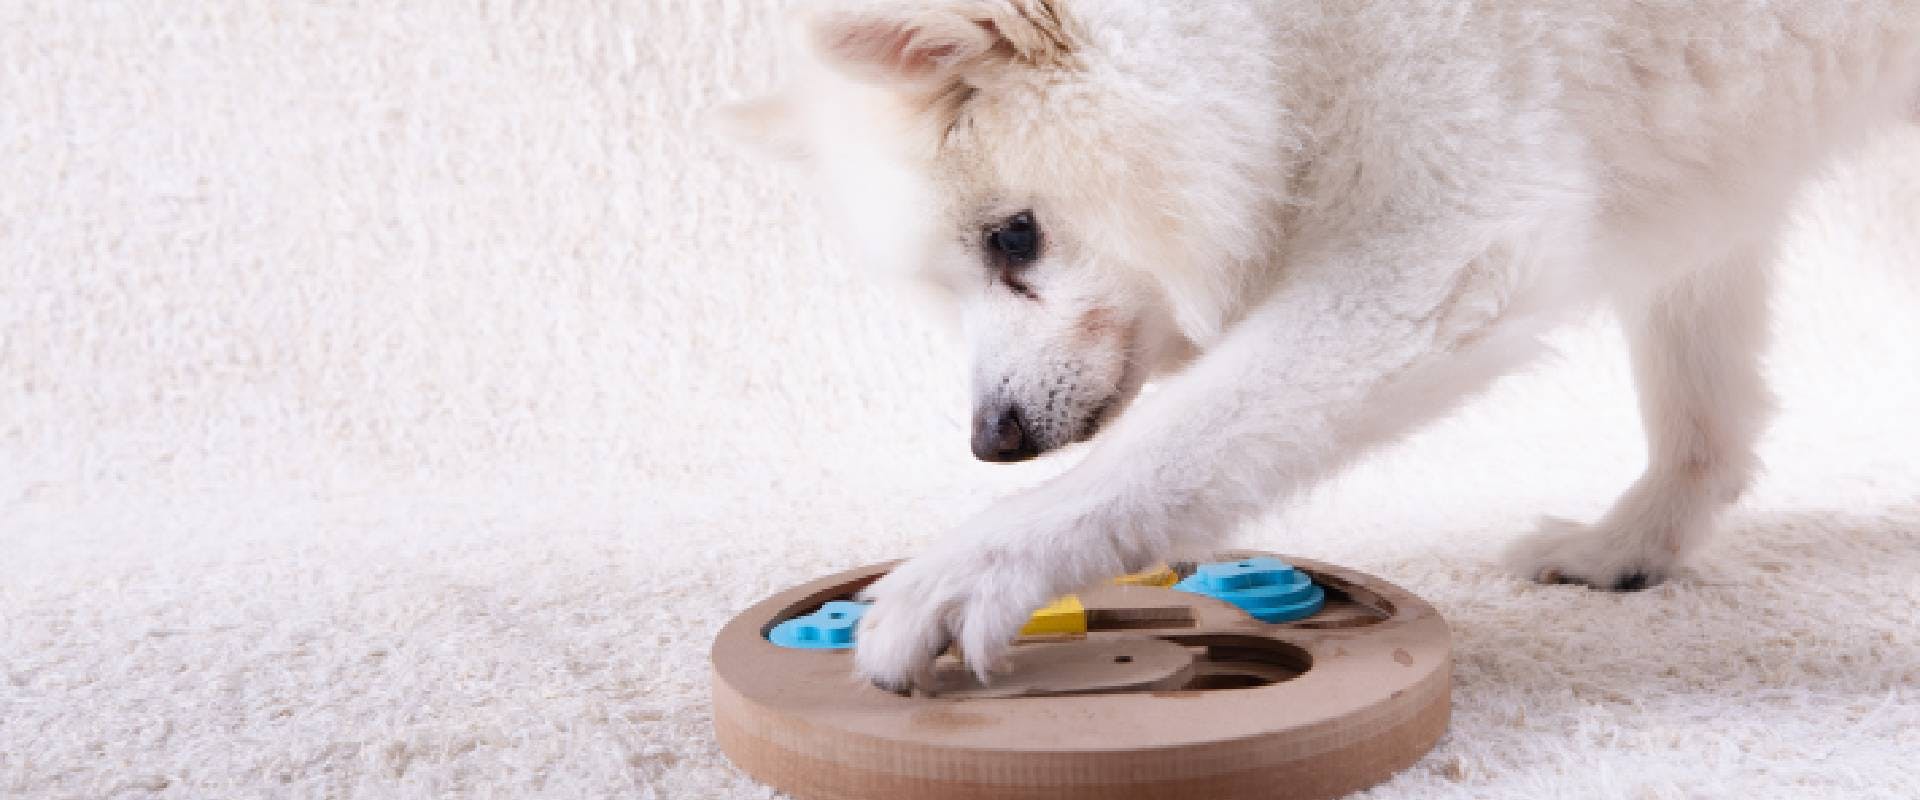 Toys to Keep Dogs Busy while School is in Session